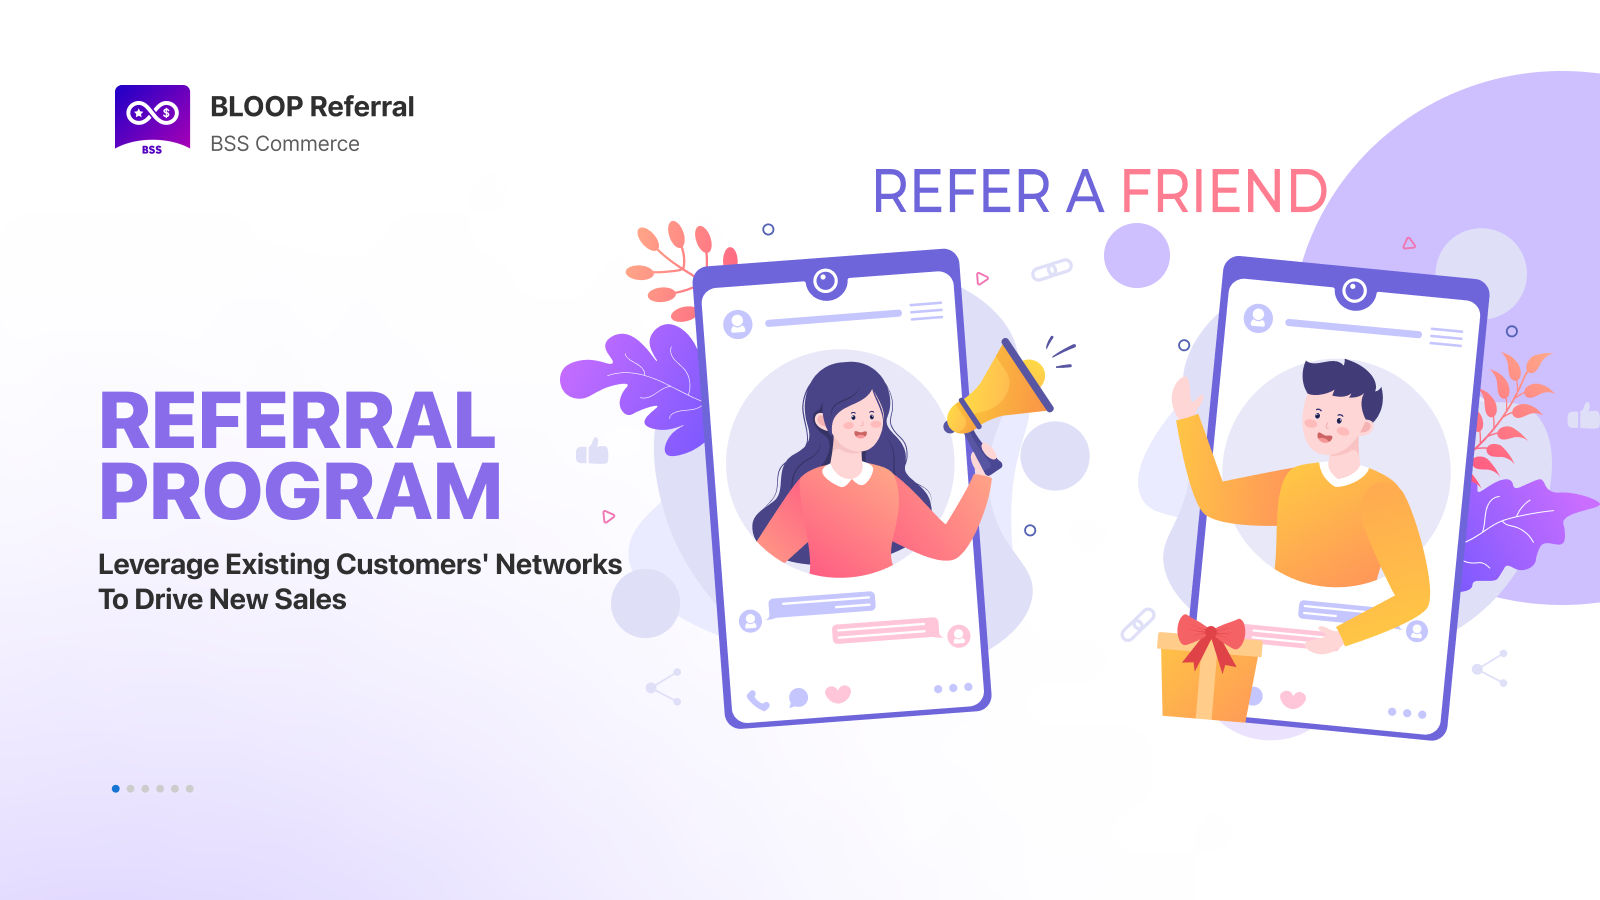 Referral program leverage customers' networks to drive sales 